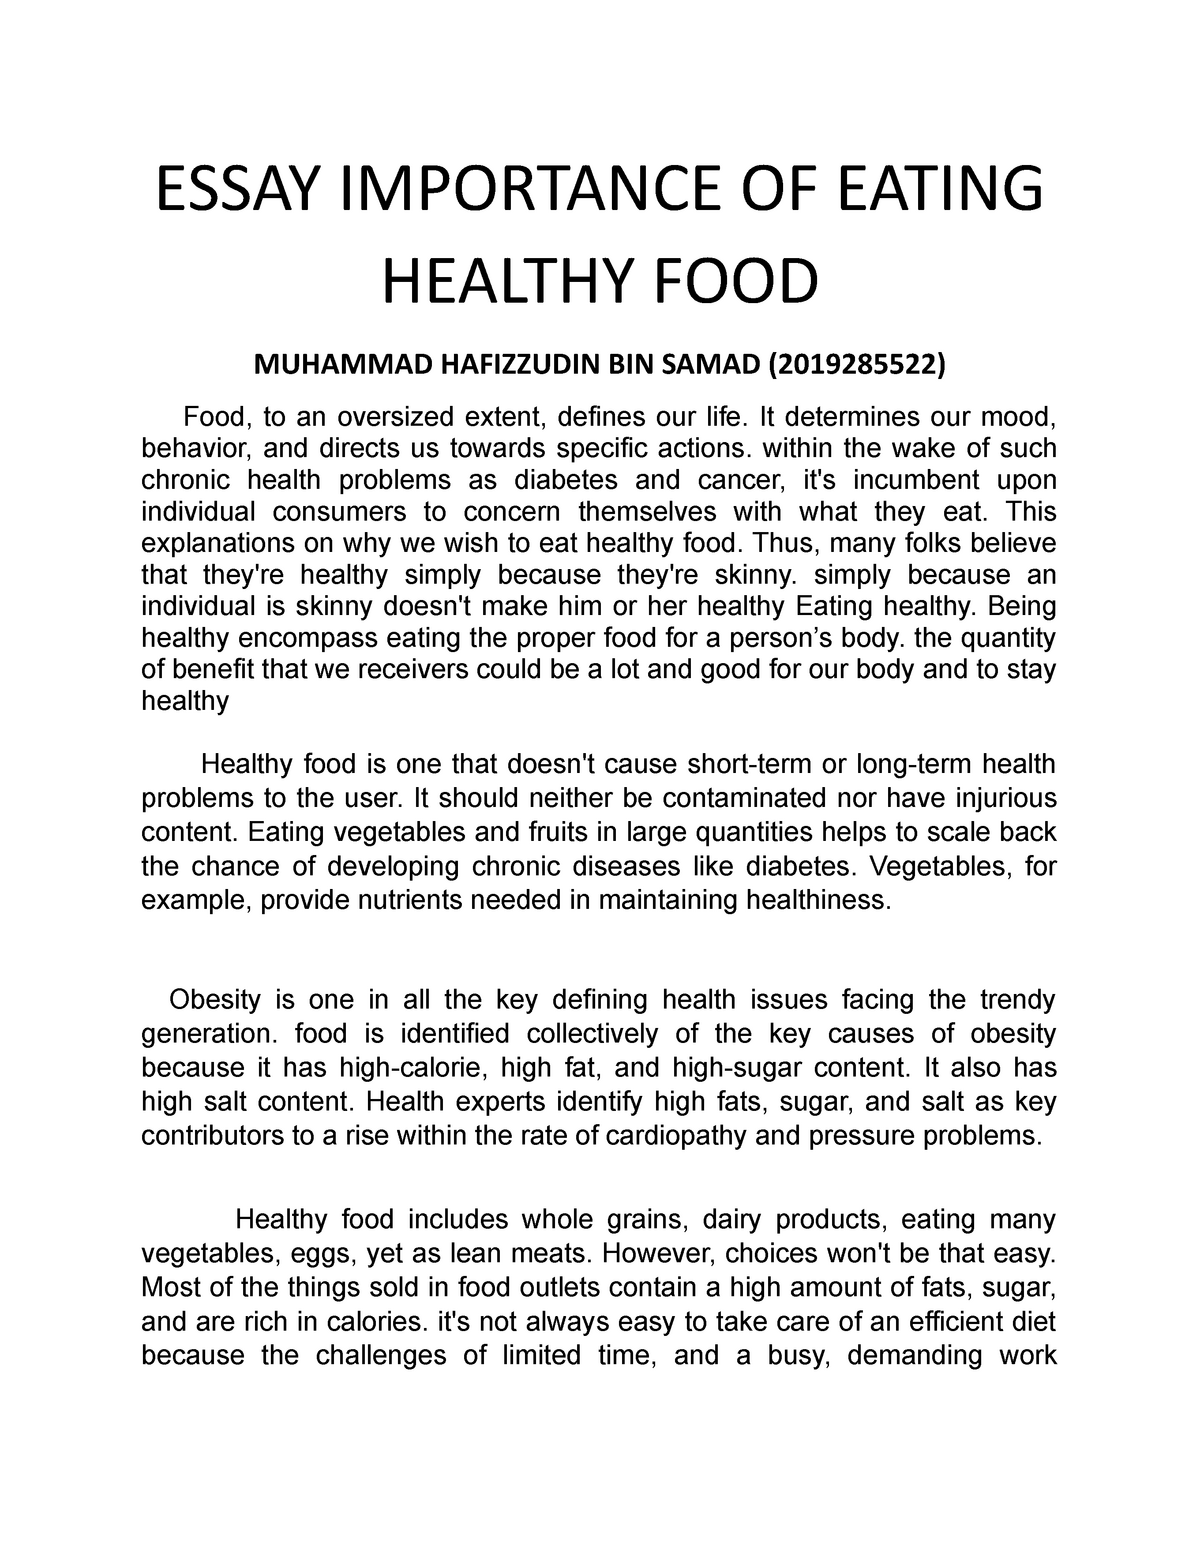 essay about eating healthy foods